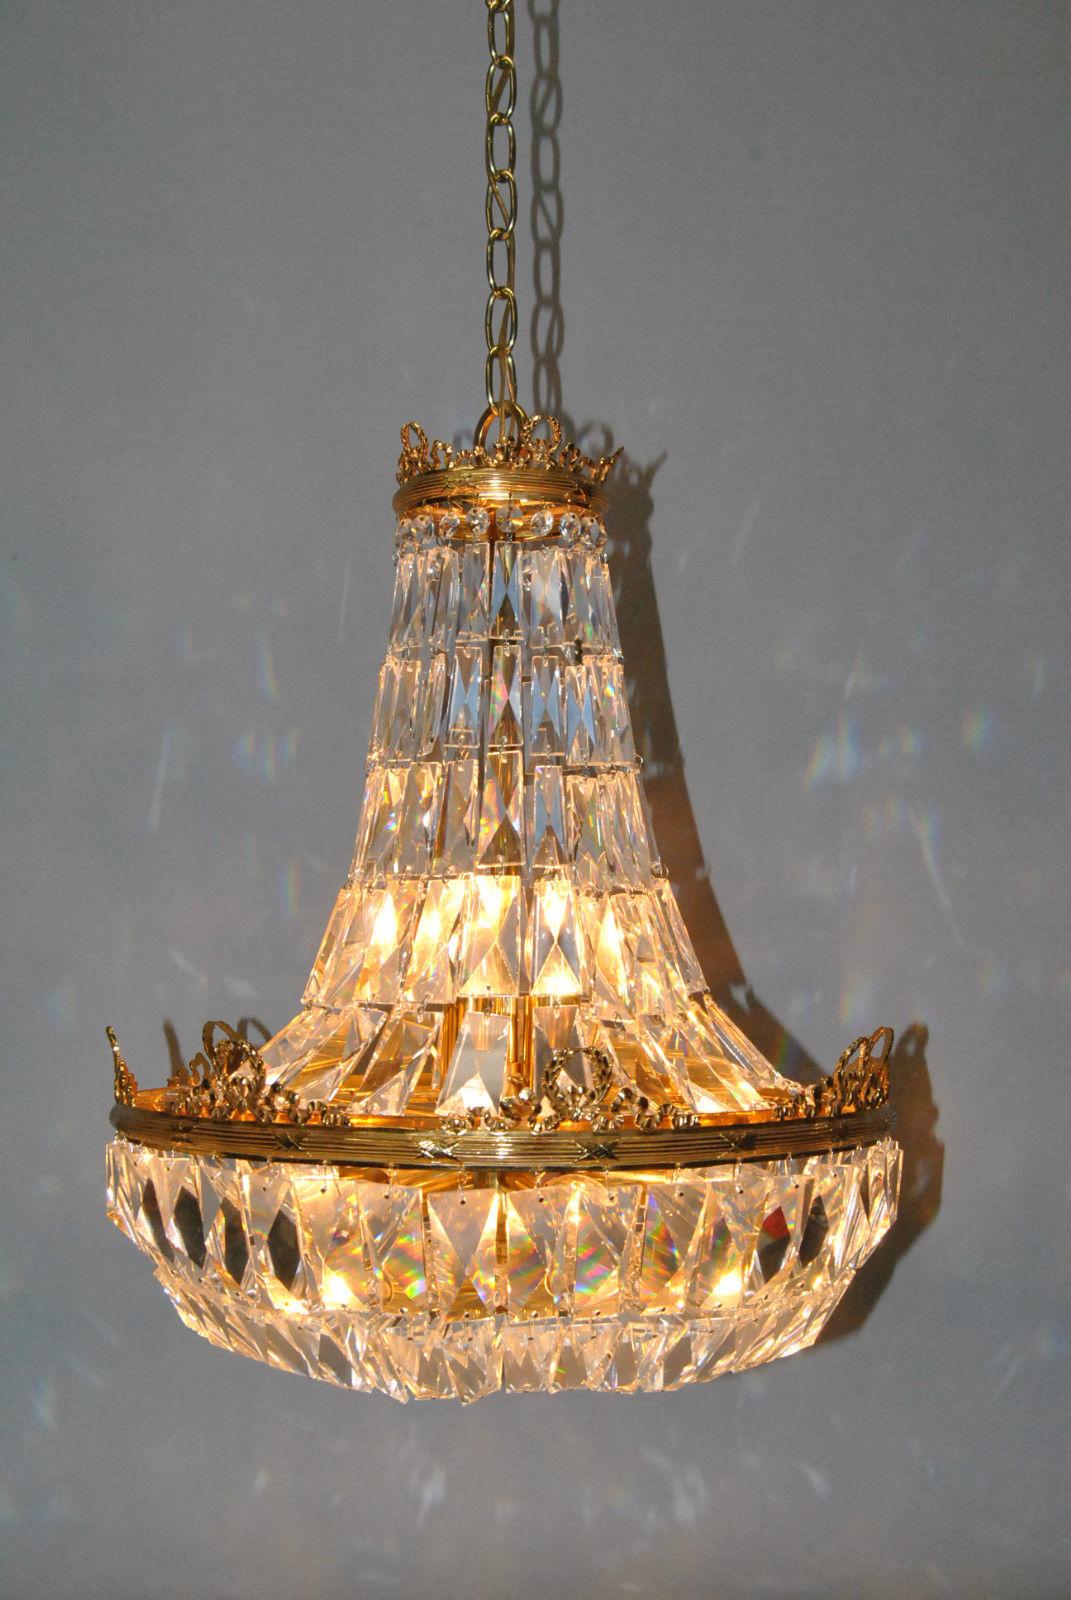 Beautiful elegant French basket form crystal chandelier. This chandelier was made in the 1970s and has rectangular cut crystals in a basket form. Crystals drape around an ornate brass frame with wreath and ribbon accents. Nine sockets provide great